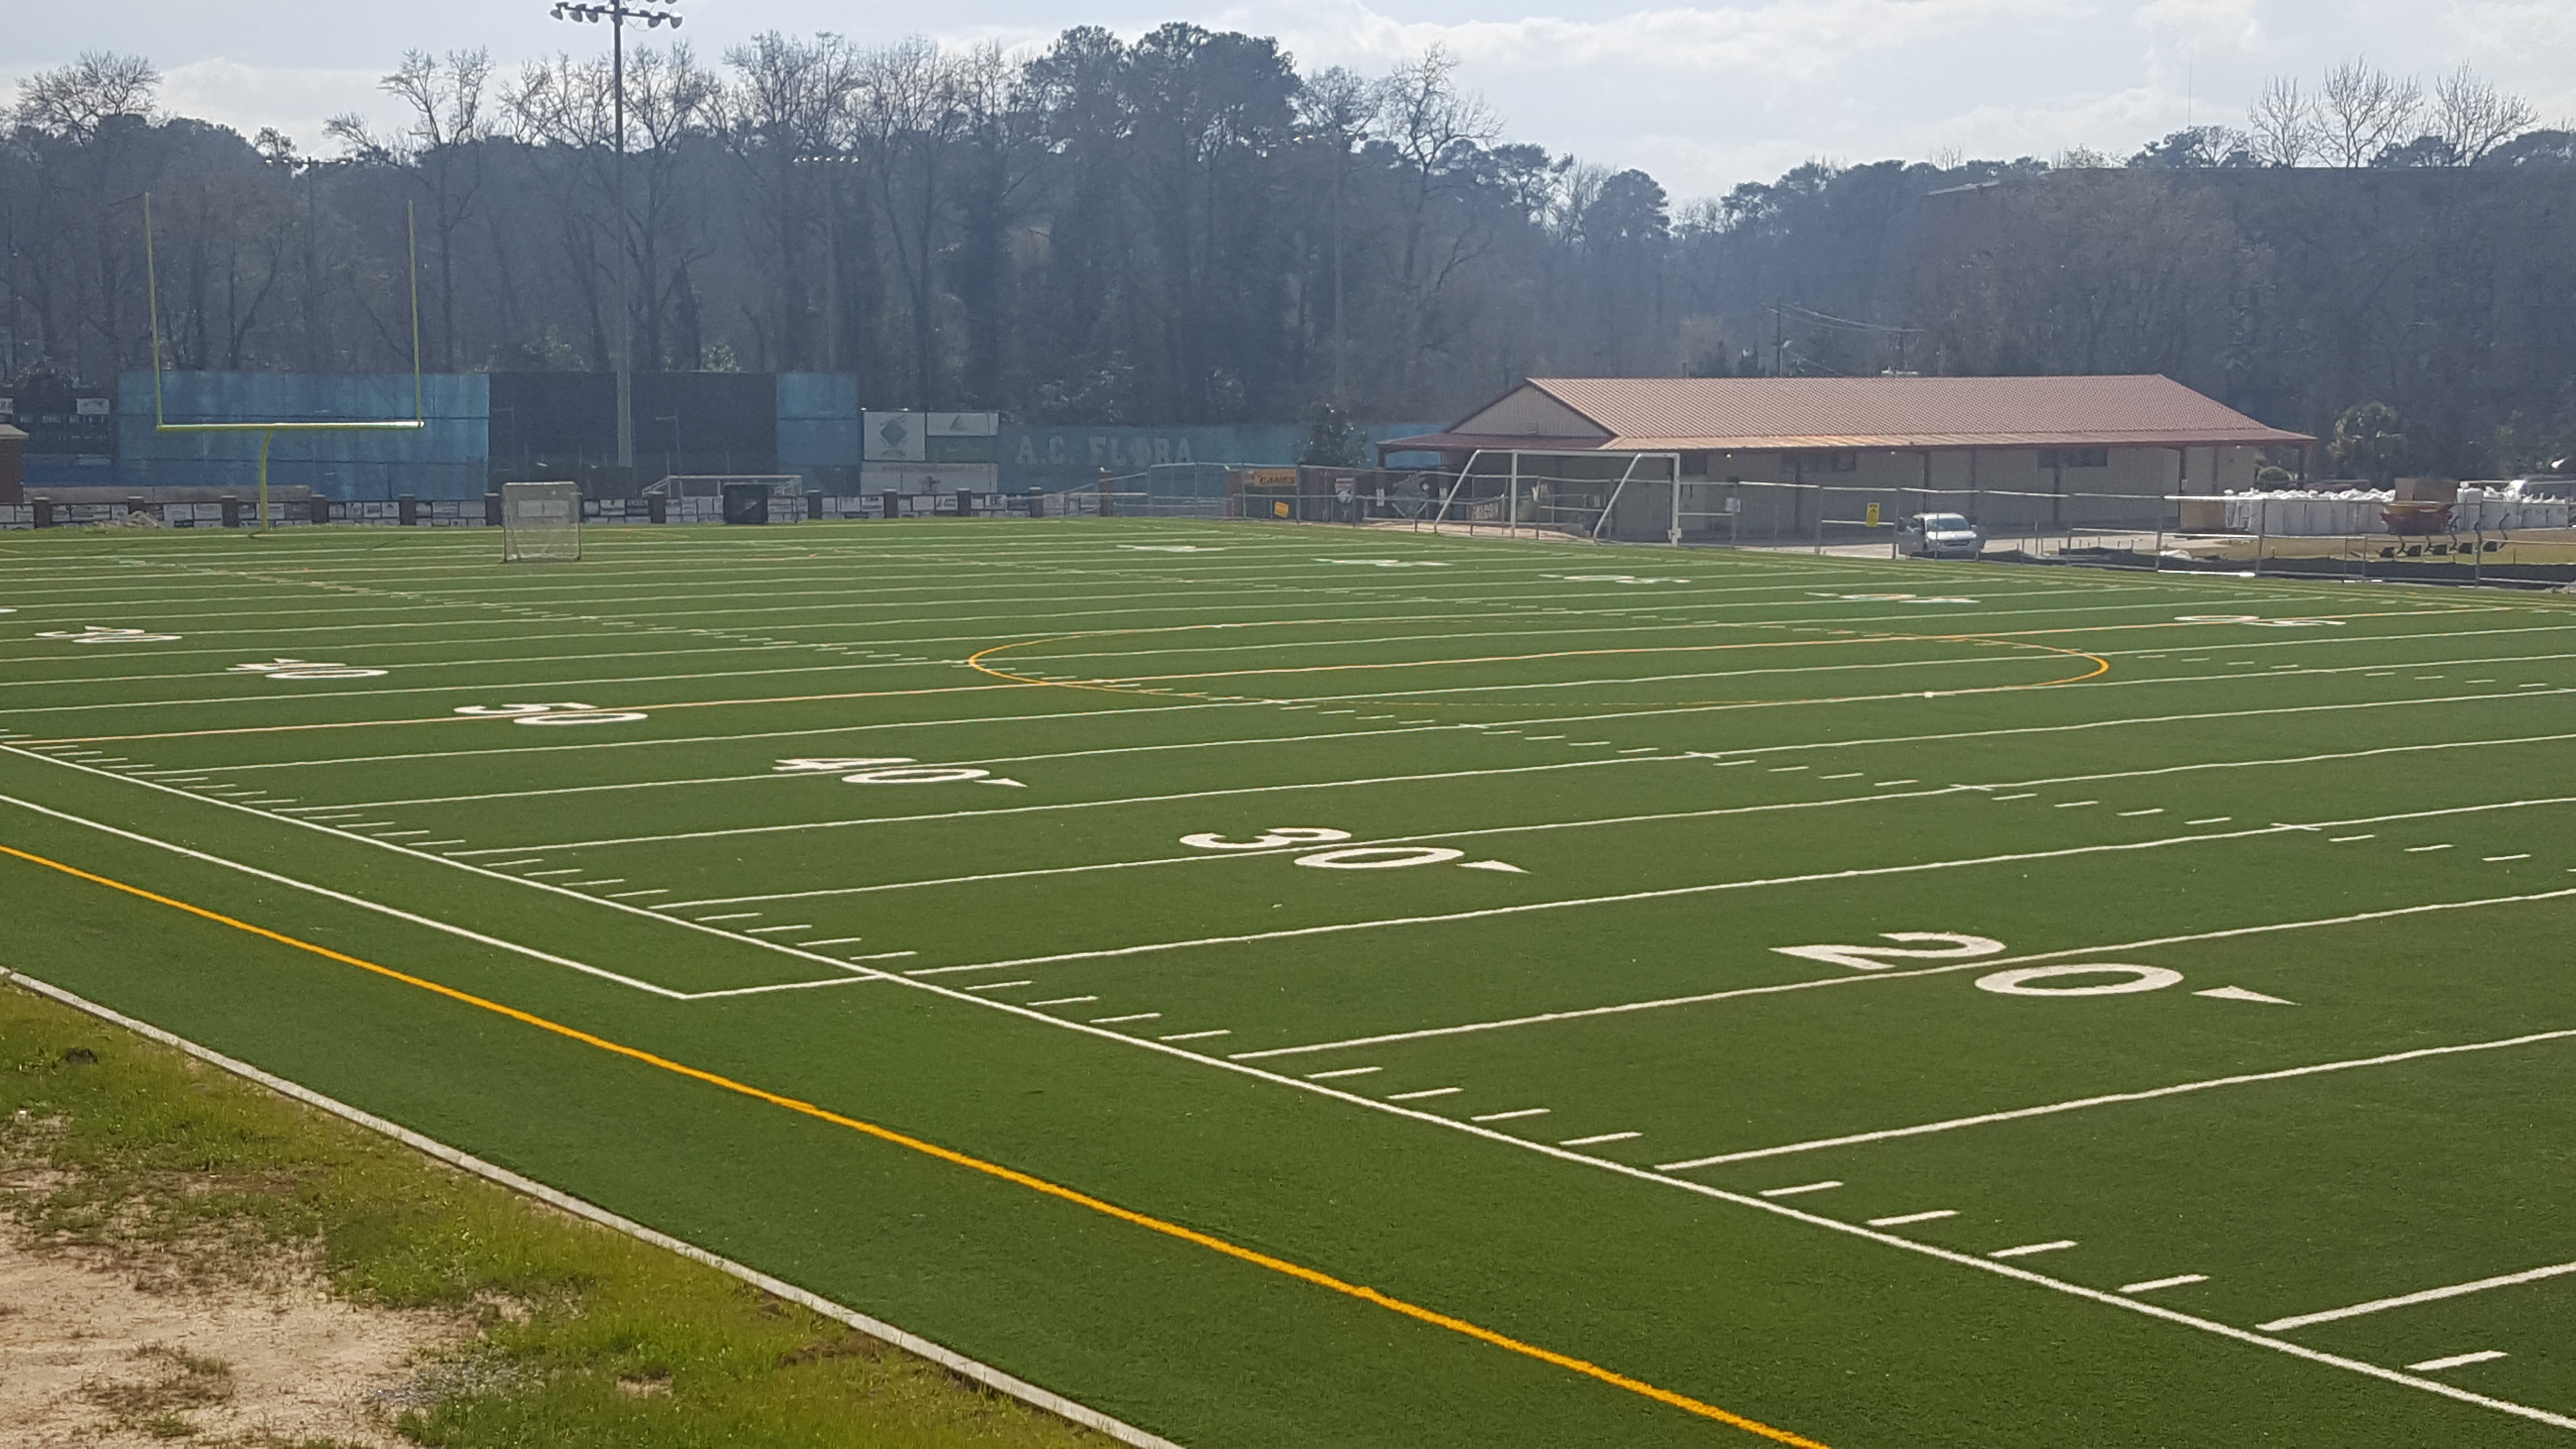 Sports Field Holdings, Inc. Completes New Football/Soccer Field at AC Flora High School